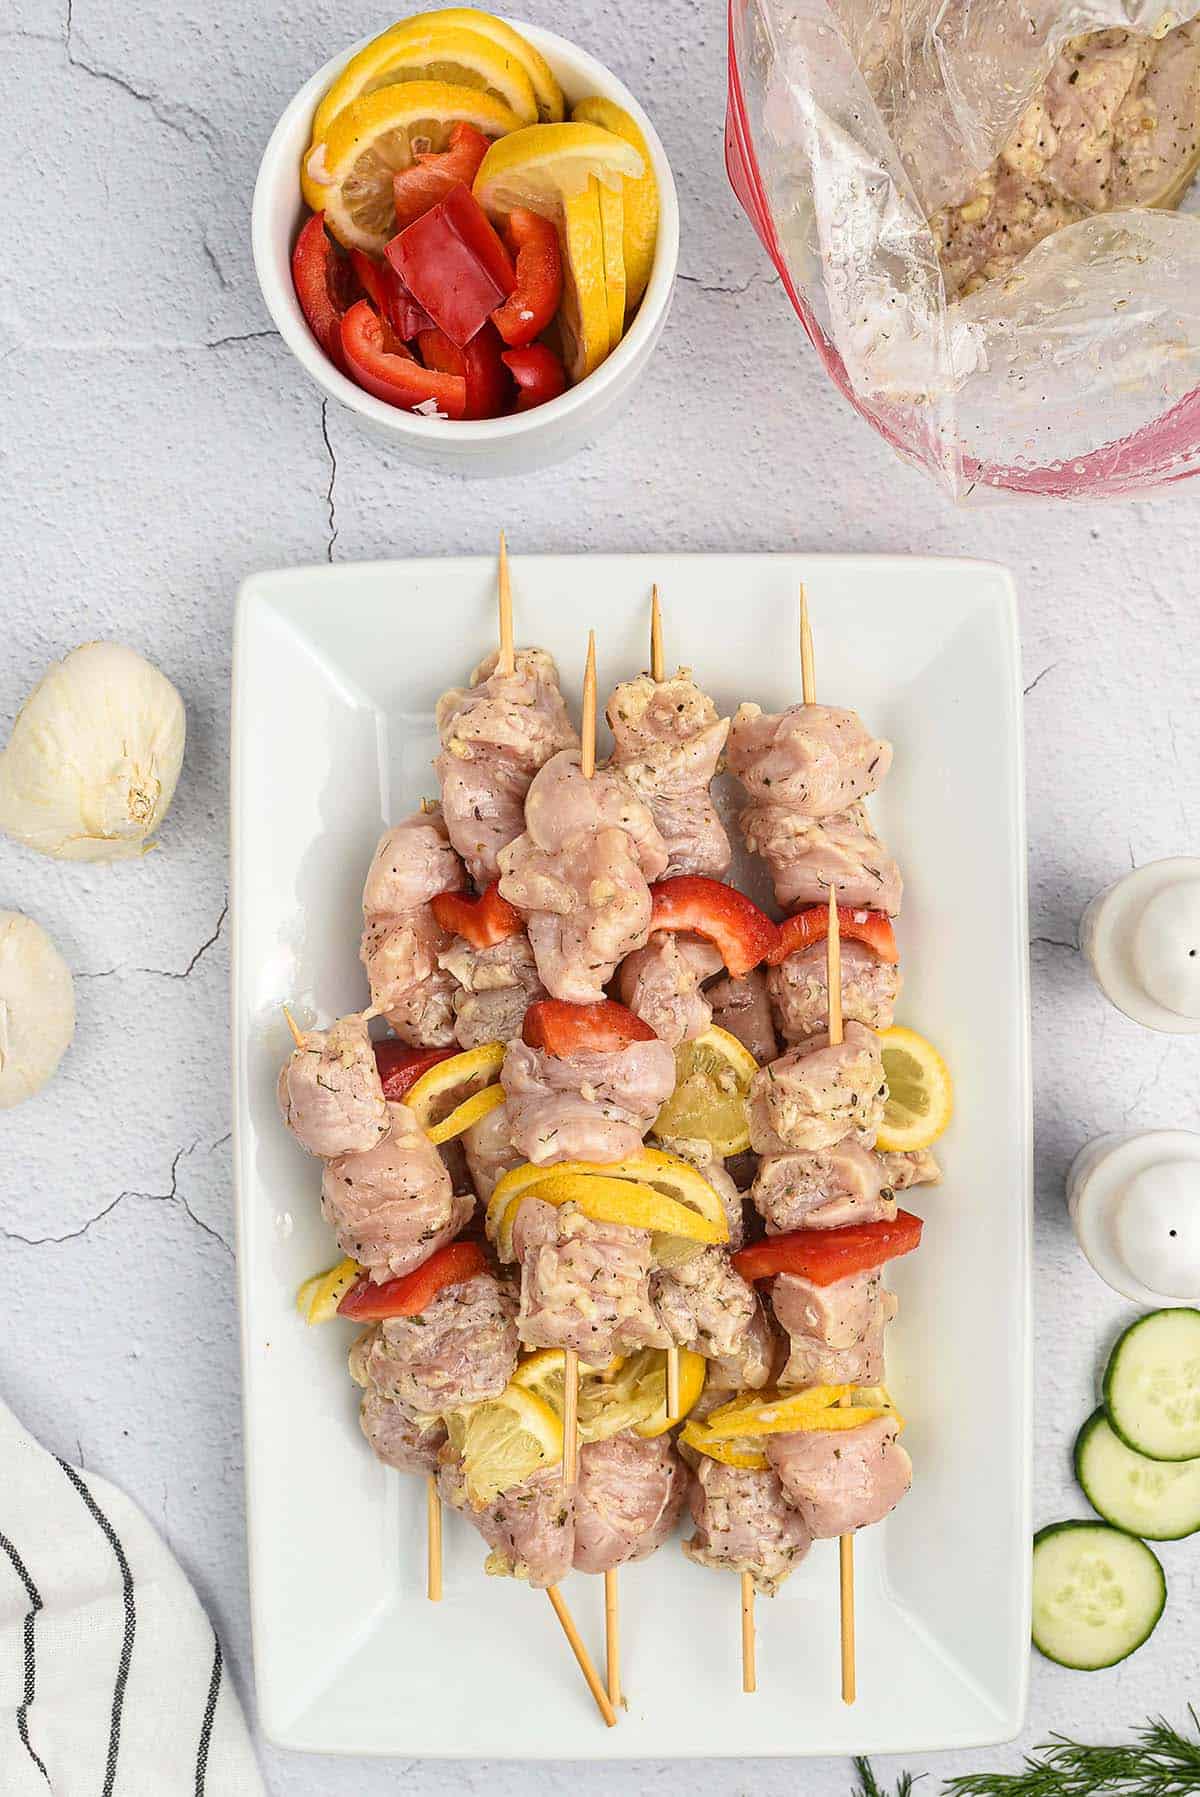 chicken and peppers on wooden skewers for grilling.